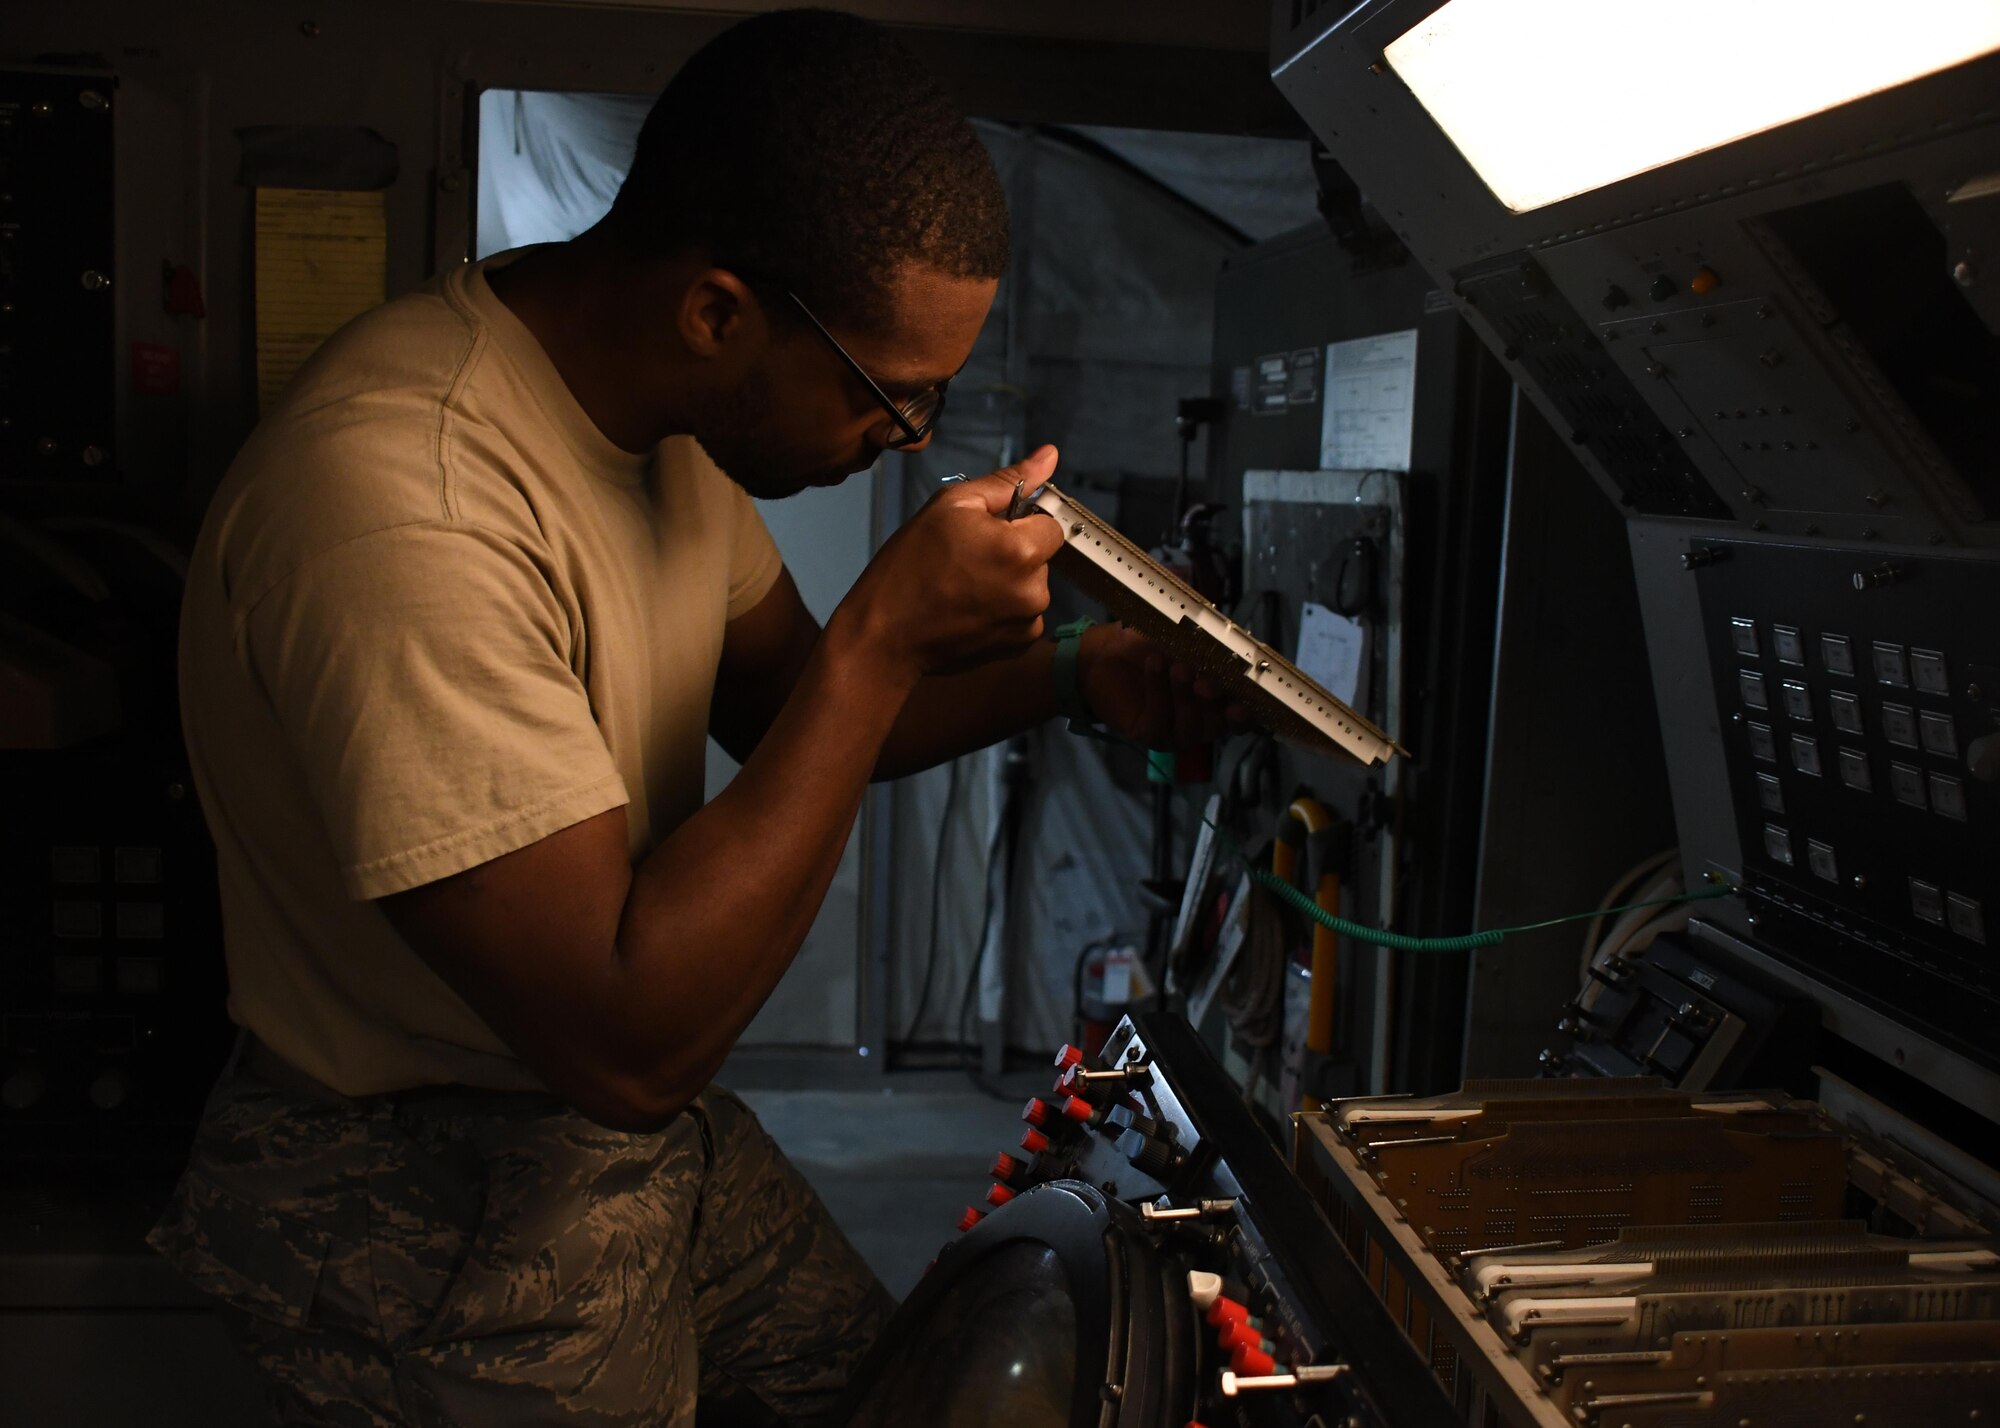 U.S. Air Force Senior Airman Darrin Brewer, a ground radar systems technician with the 727th Expeditionary Air Control Squadron Detachment 3, cleans out a plan position indicator on a radar system at Al Udeid Air Base, Qatar, March 31, 2017. Brewer deployed with 32 other Airmen from the 726th ACS at Mountain Home Air Force Base, Idaho, and works to maintain ground radar systems at Al Udeid. (U.S. Air Force photo by Senior Airman Miles Wilson)